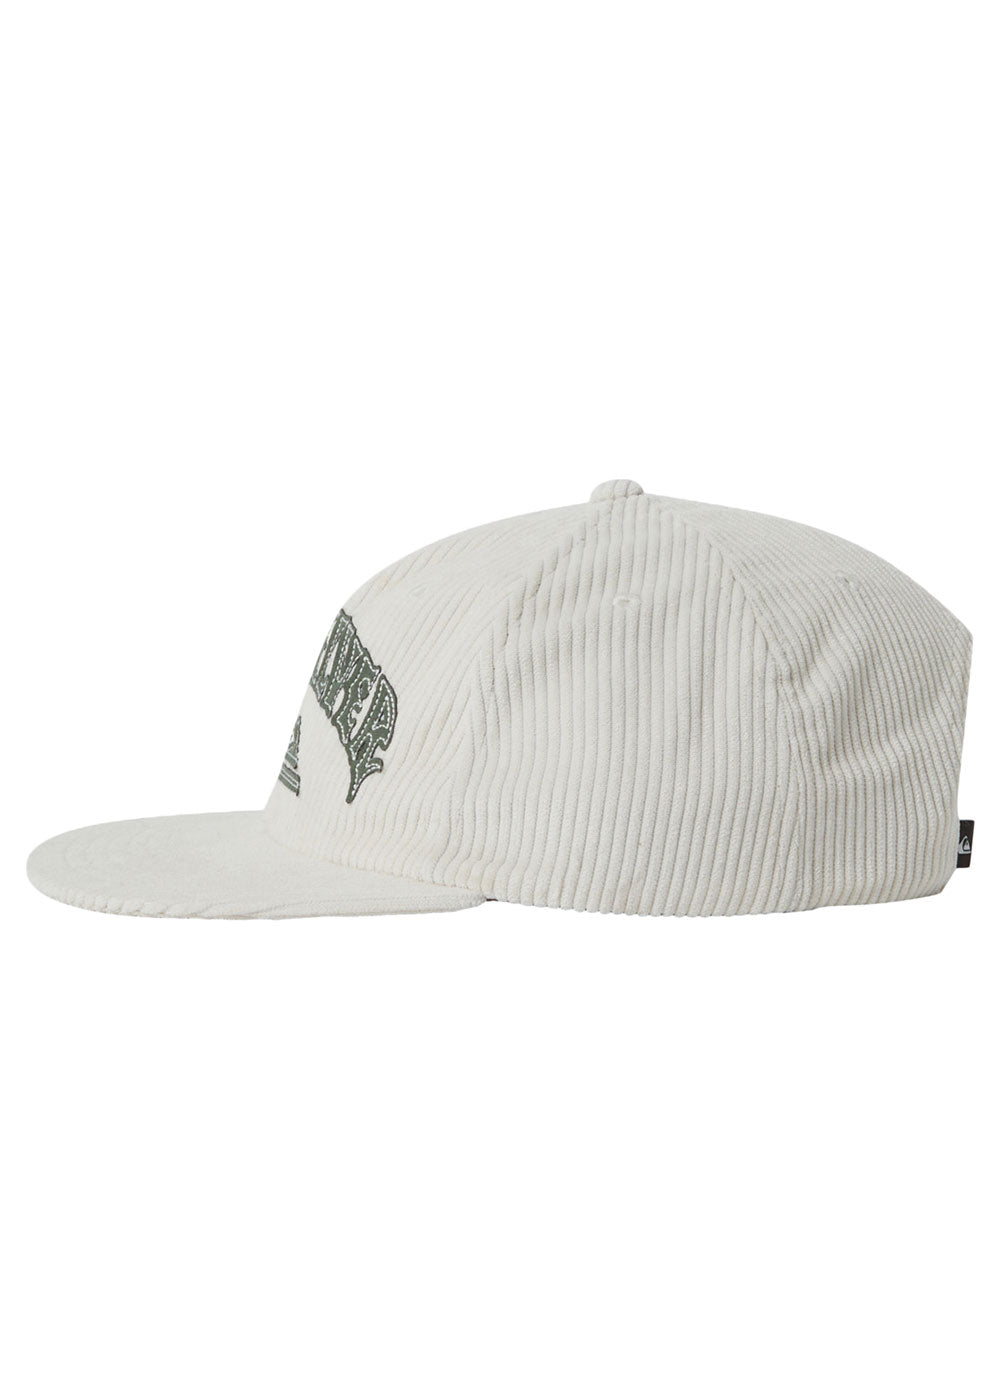 Quiksilver Corduroy Cap Curbed - Adreno - Ocean Outfitters